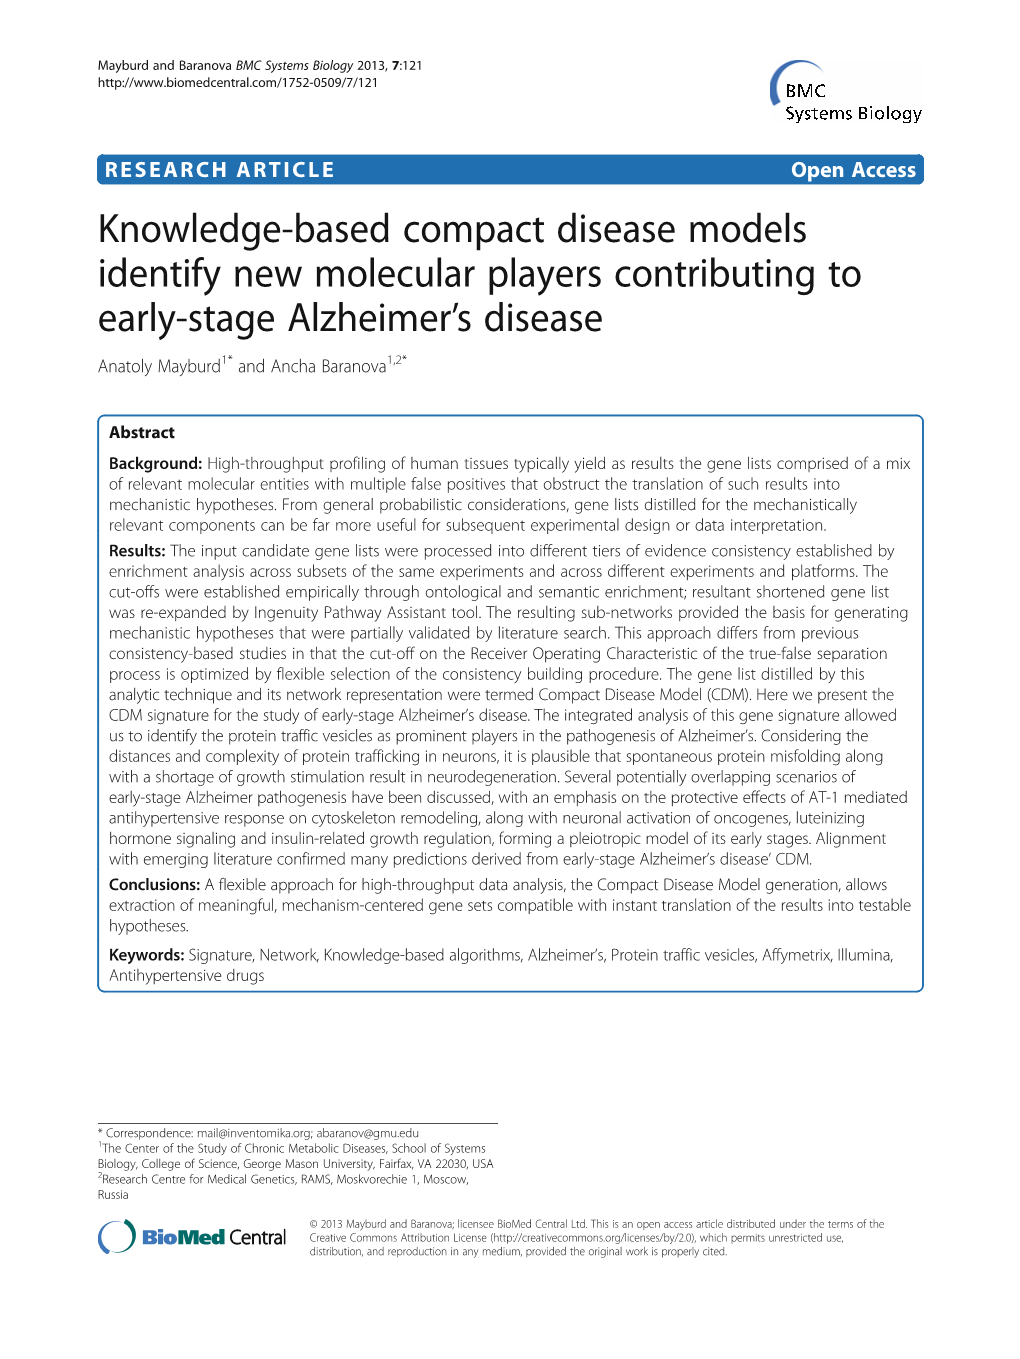 Knowledge-Based Compact Disease Models Identify New Molecular Players Contributing to Early-Stage Alzheimer’S Disease Anatoly Mayburd1* and Ancha Baranova1,2*